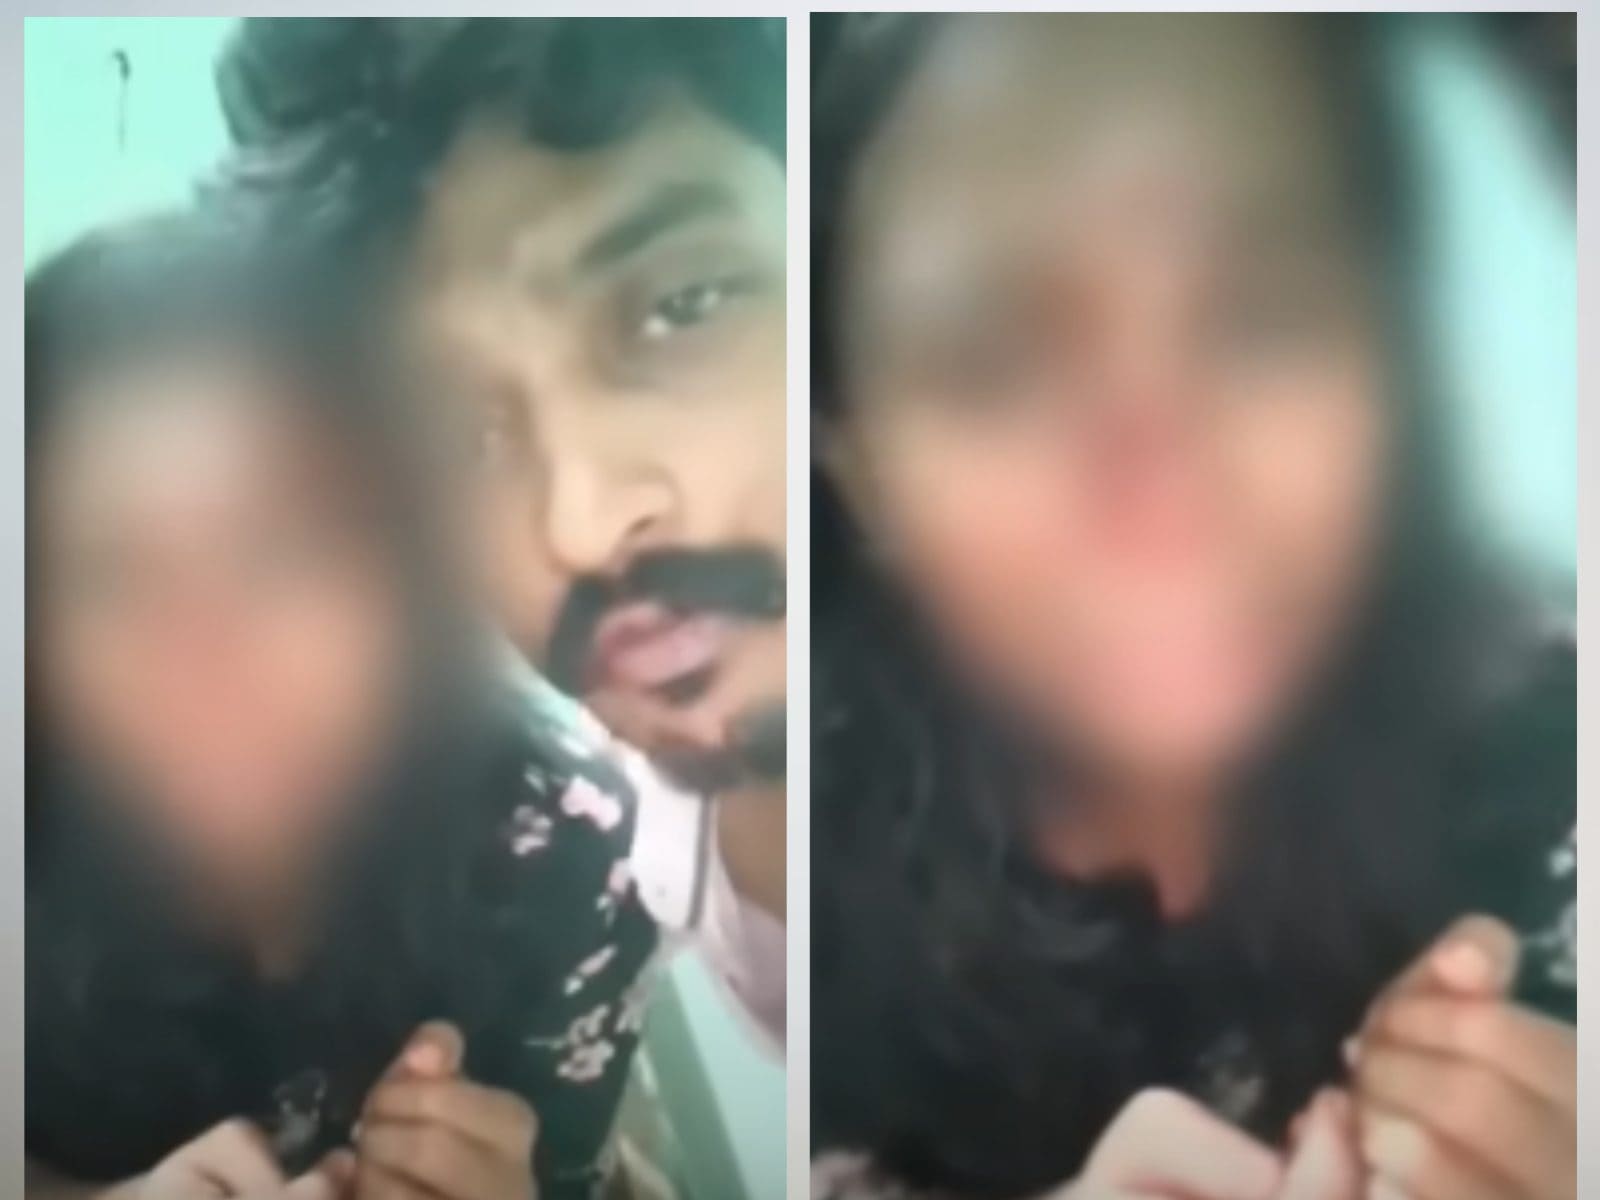 Kerala Man Thrashes Wife, Films Assault, Shares Video With Friends image